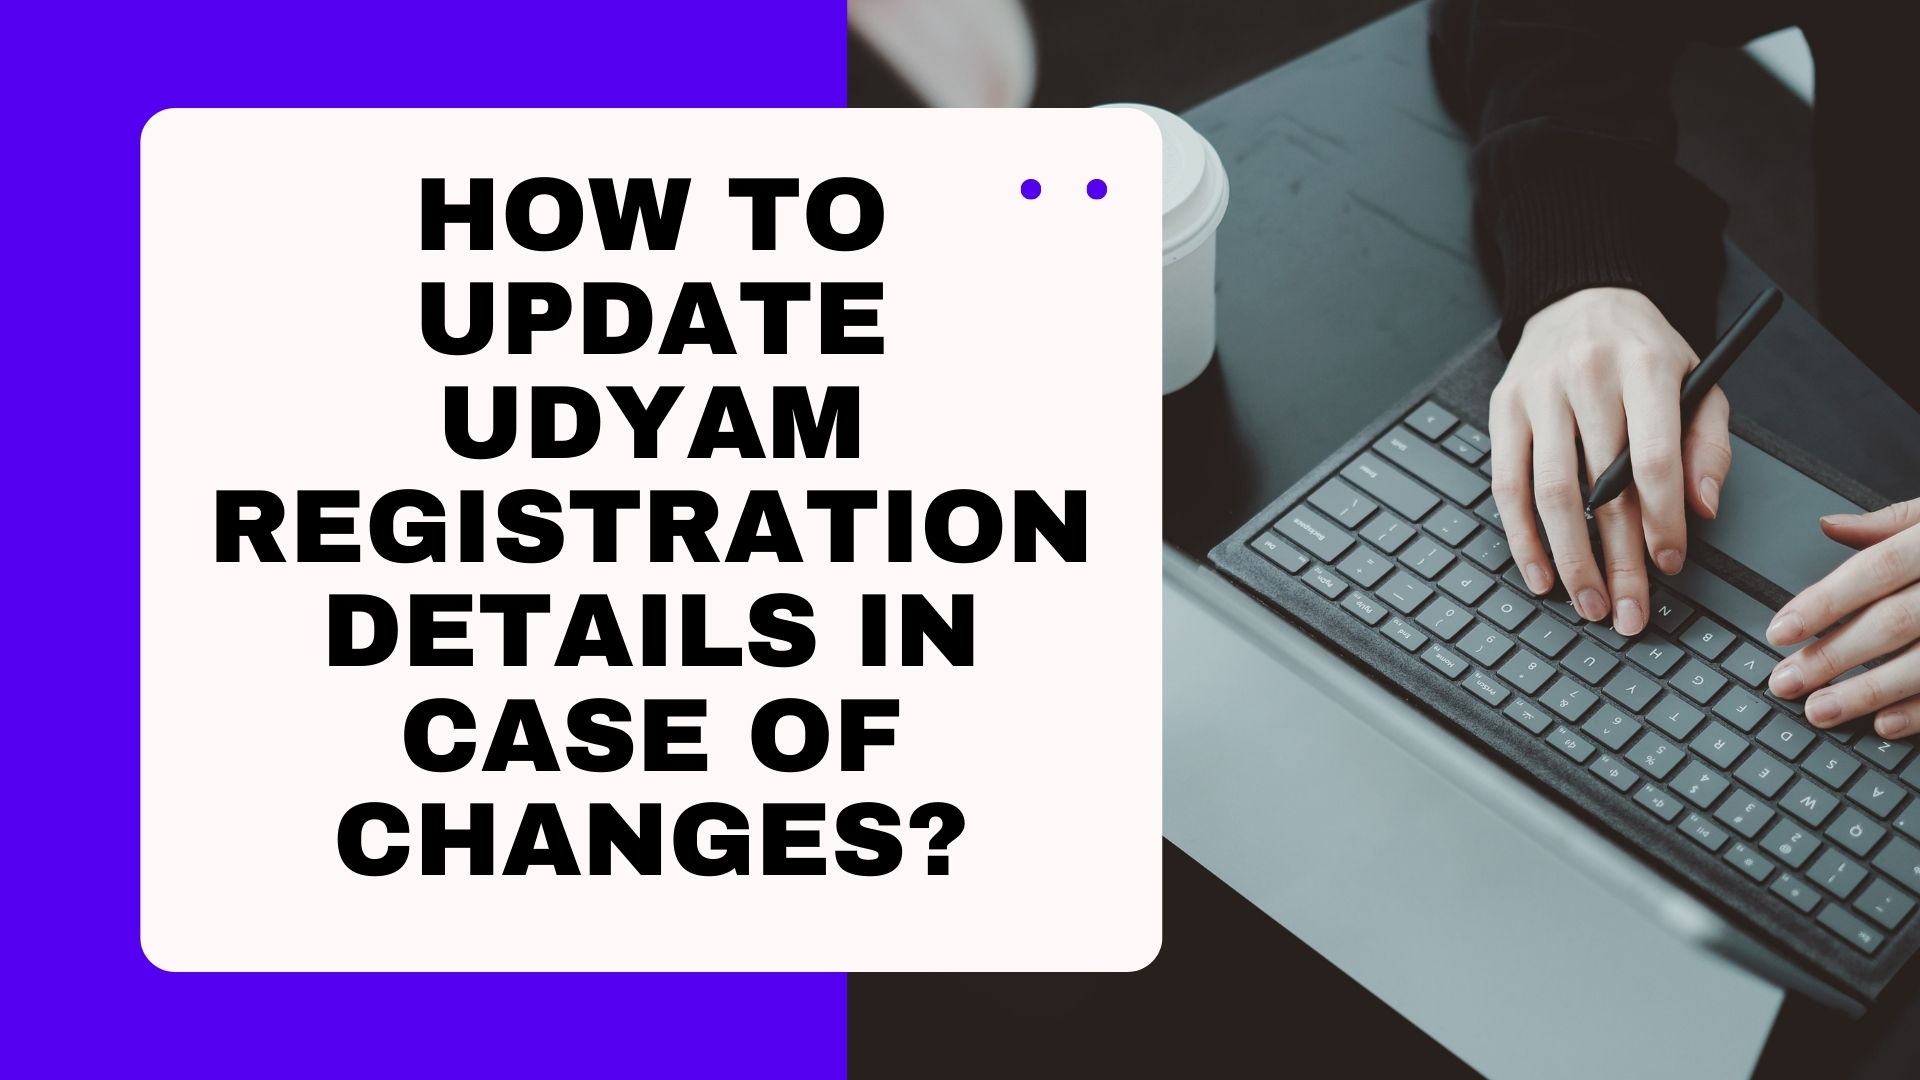 How to Update Udyam Registration Details in Case of Changes